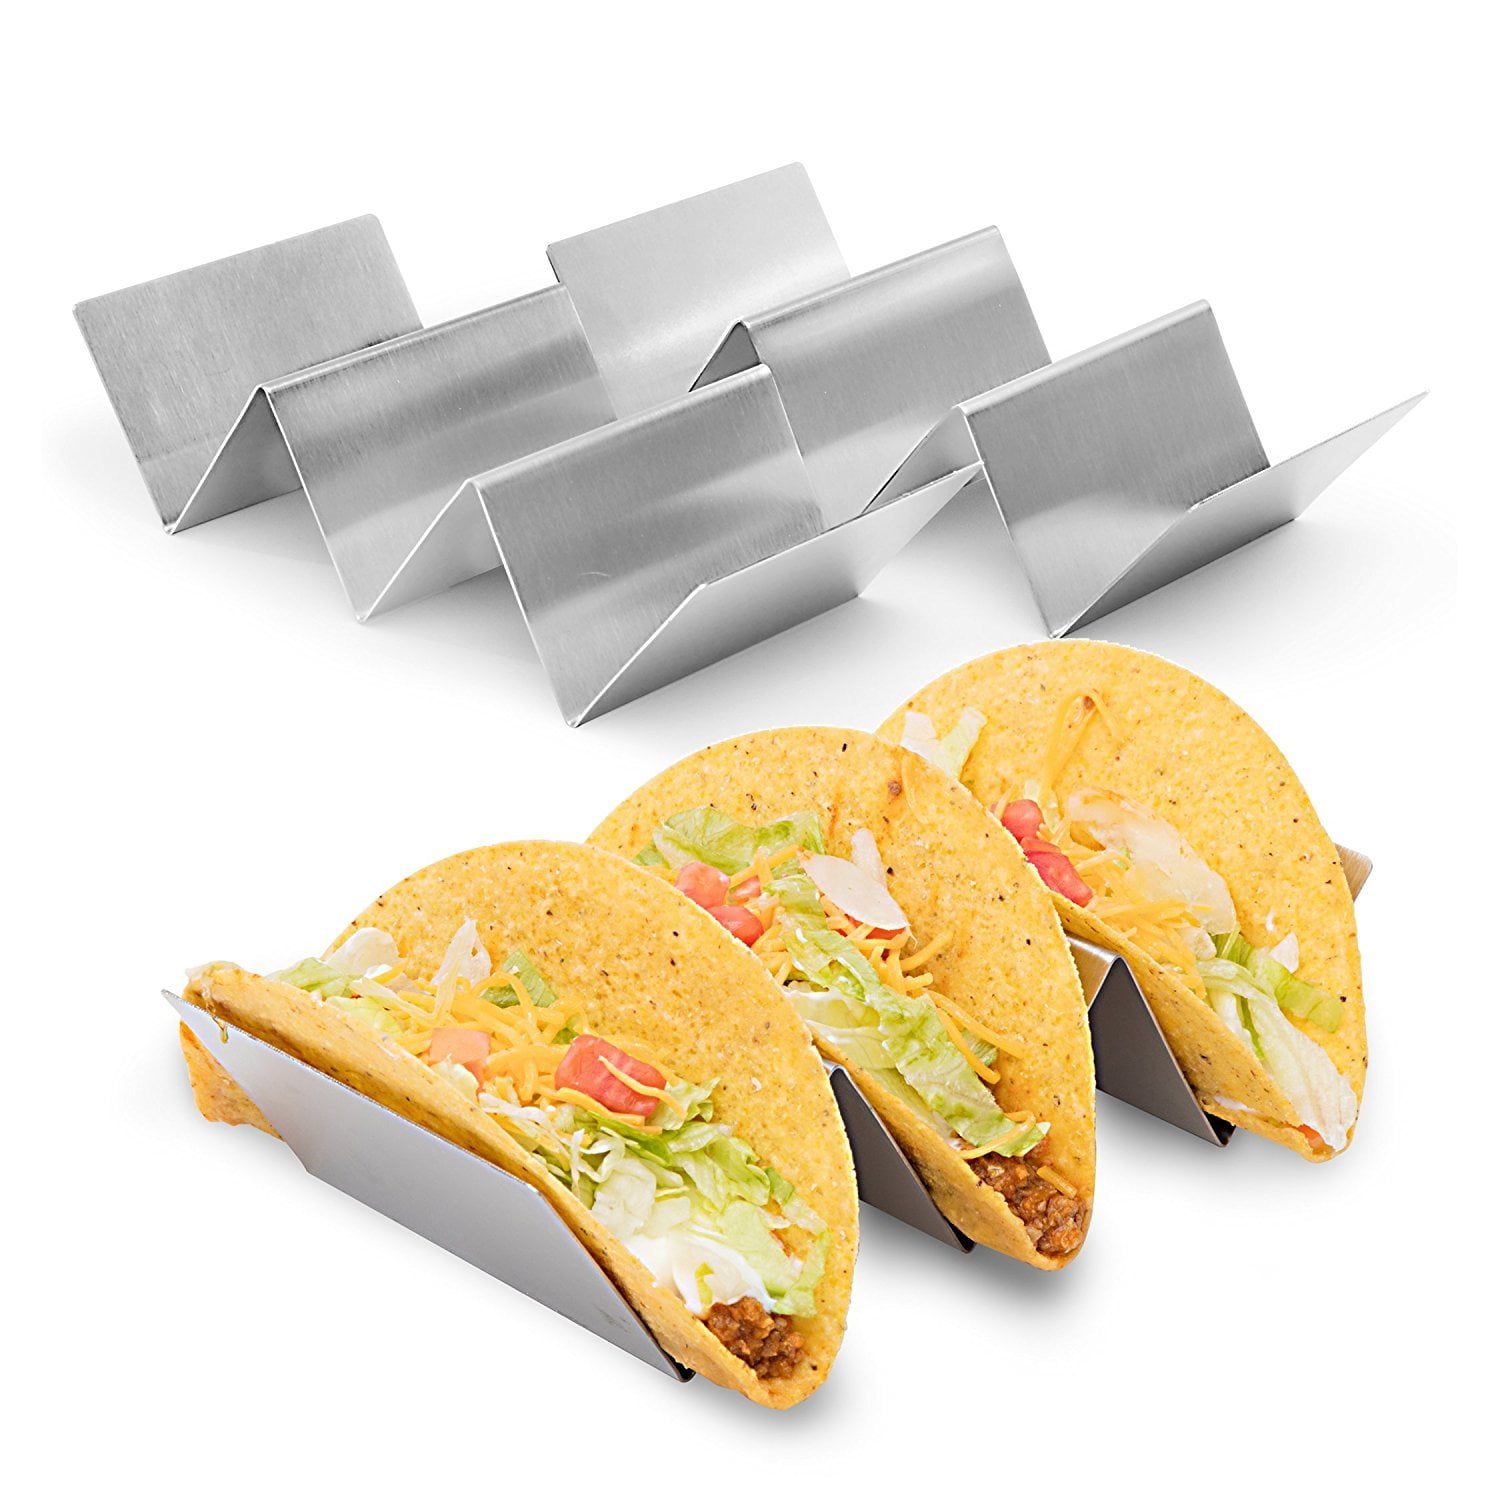 Stainless Steel 2 Pack Taco Holder,Rustproof Taco Rack Holds Up to 4-5 Tacos Each Taco Stand Taco Tray for Soft Hard Shell with Silicone Protective Tips Oven Safe 